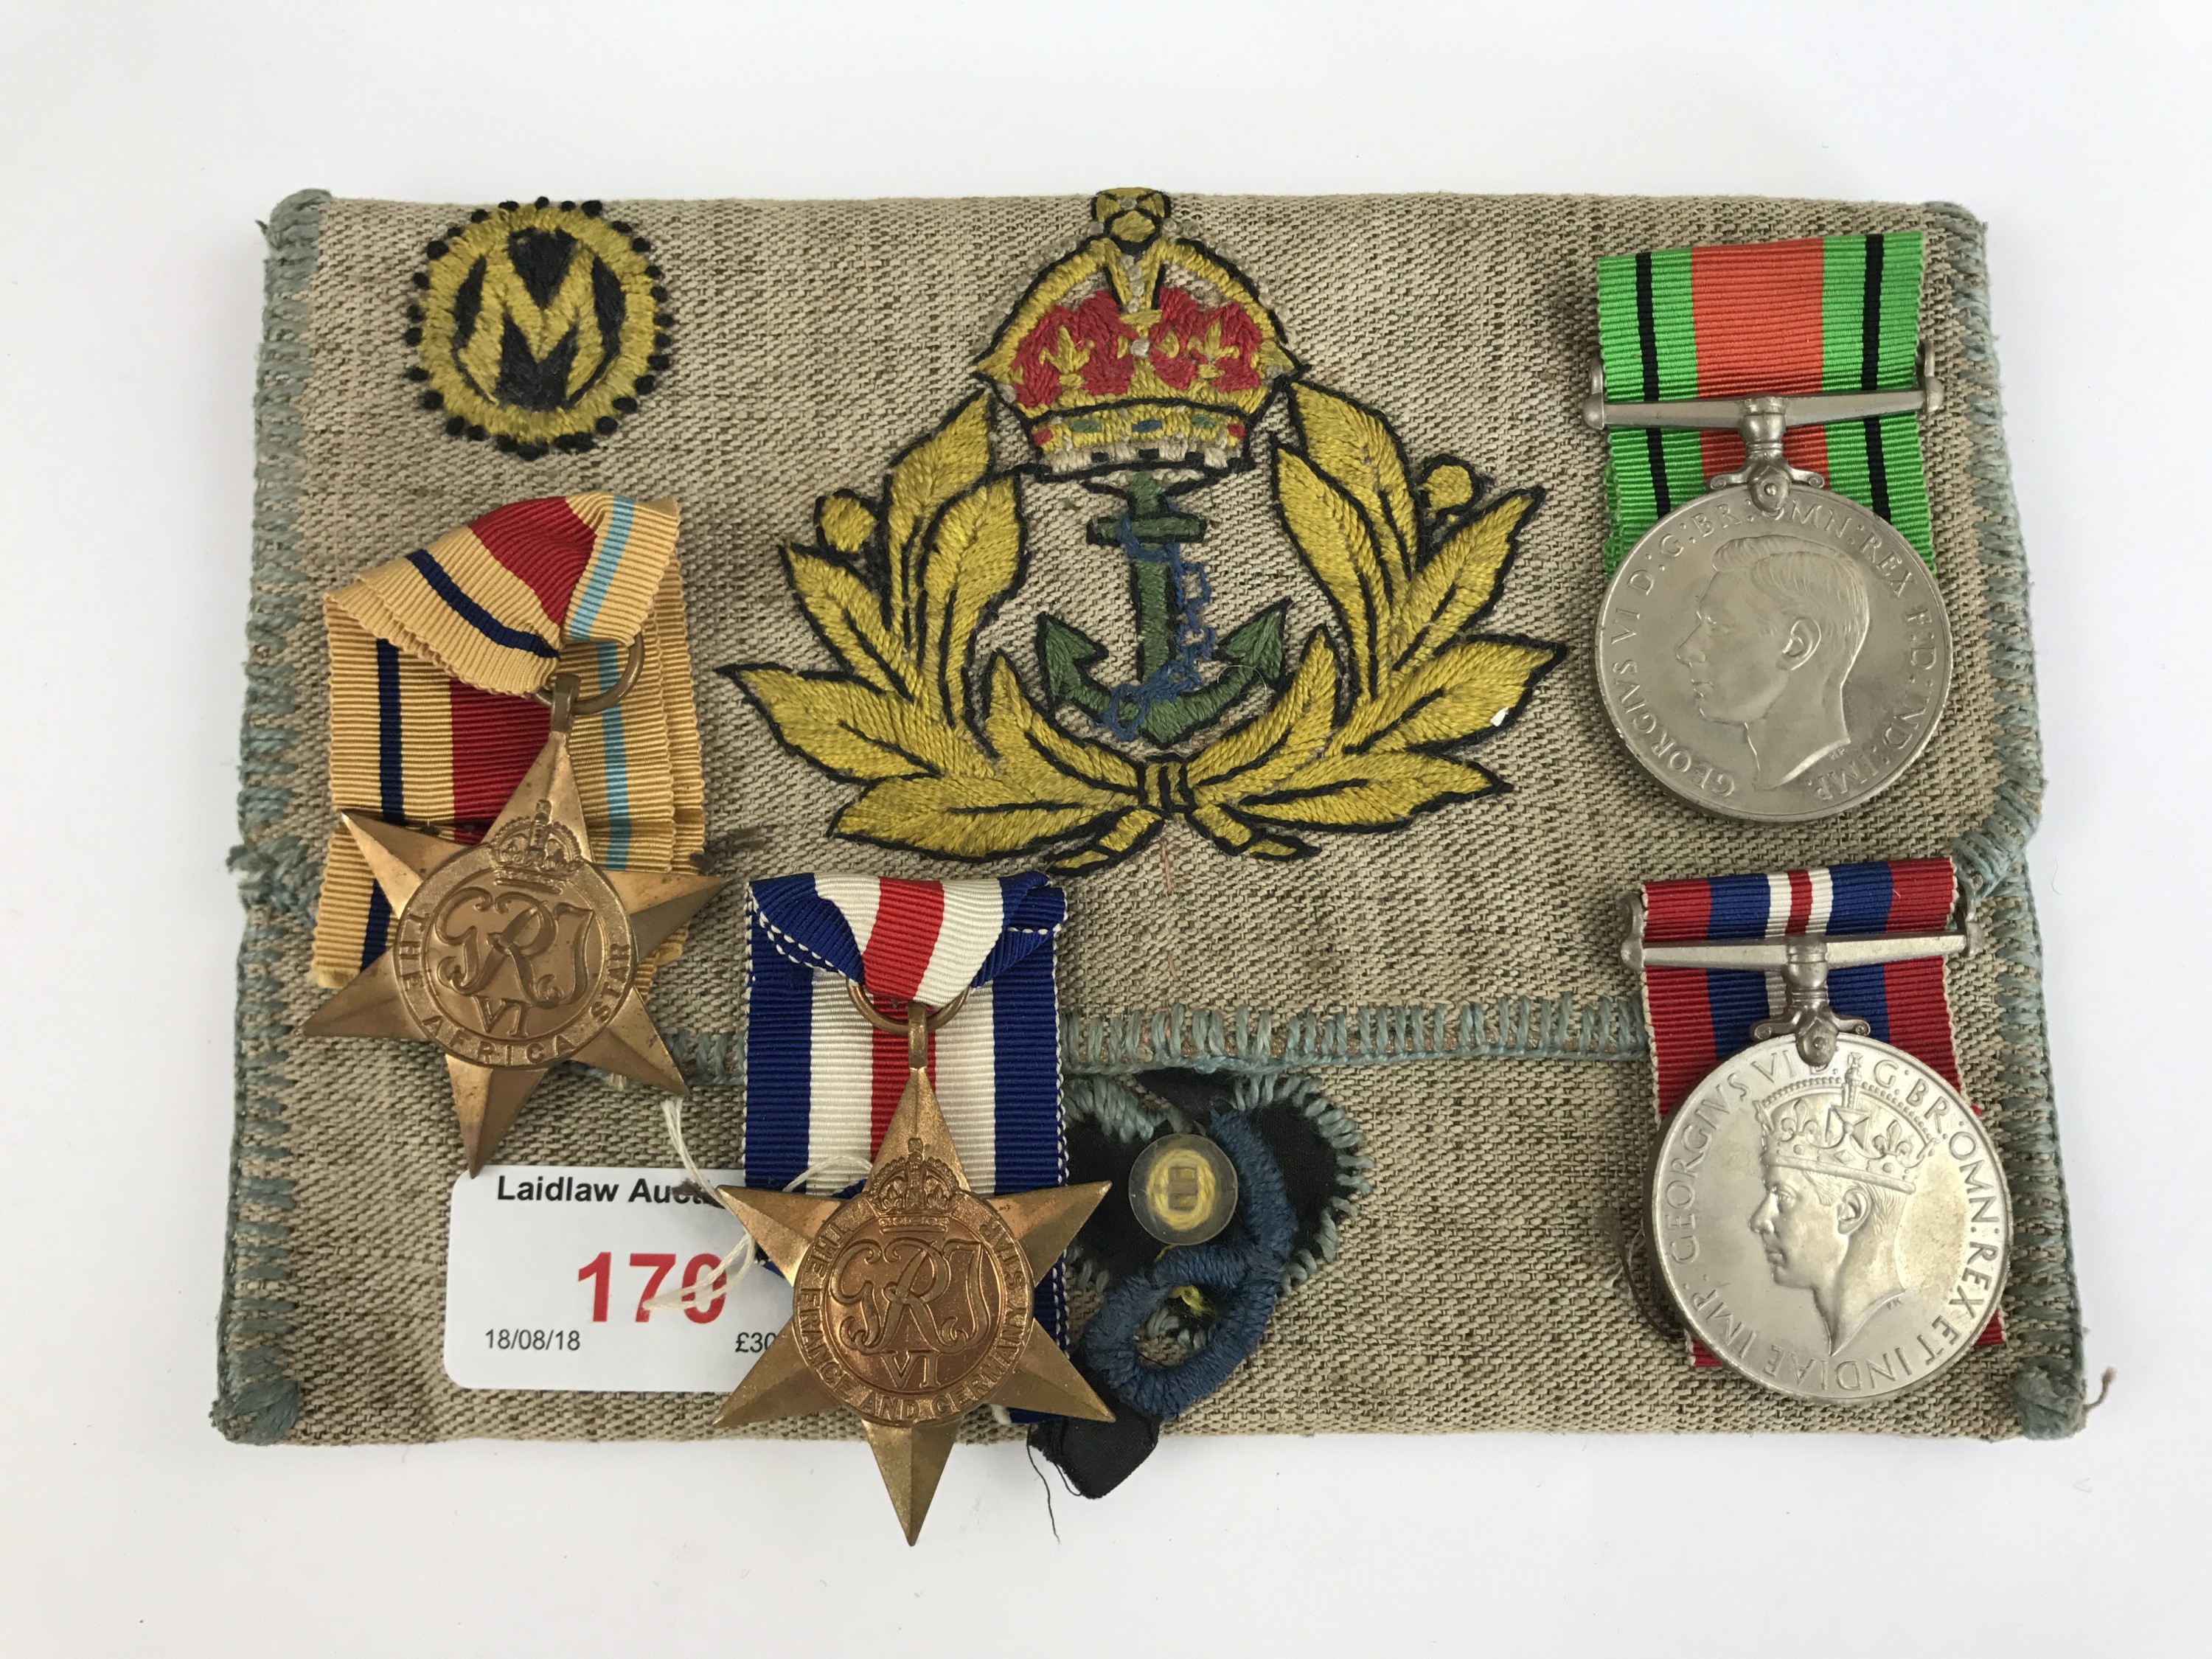 A Second World War Royal Navy campaign medal group together with a related hand-embroidered pouch